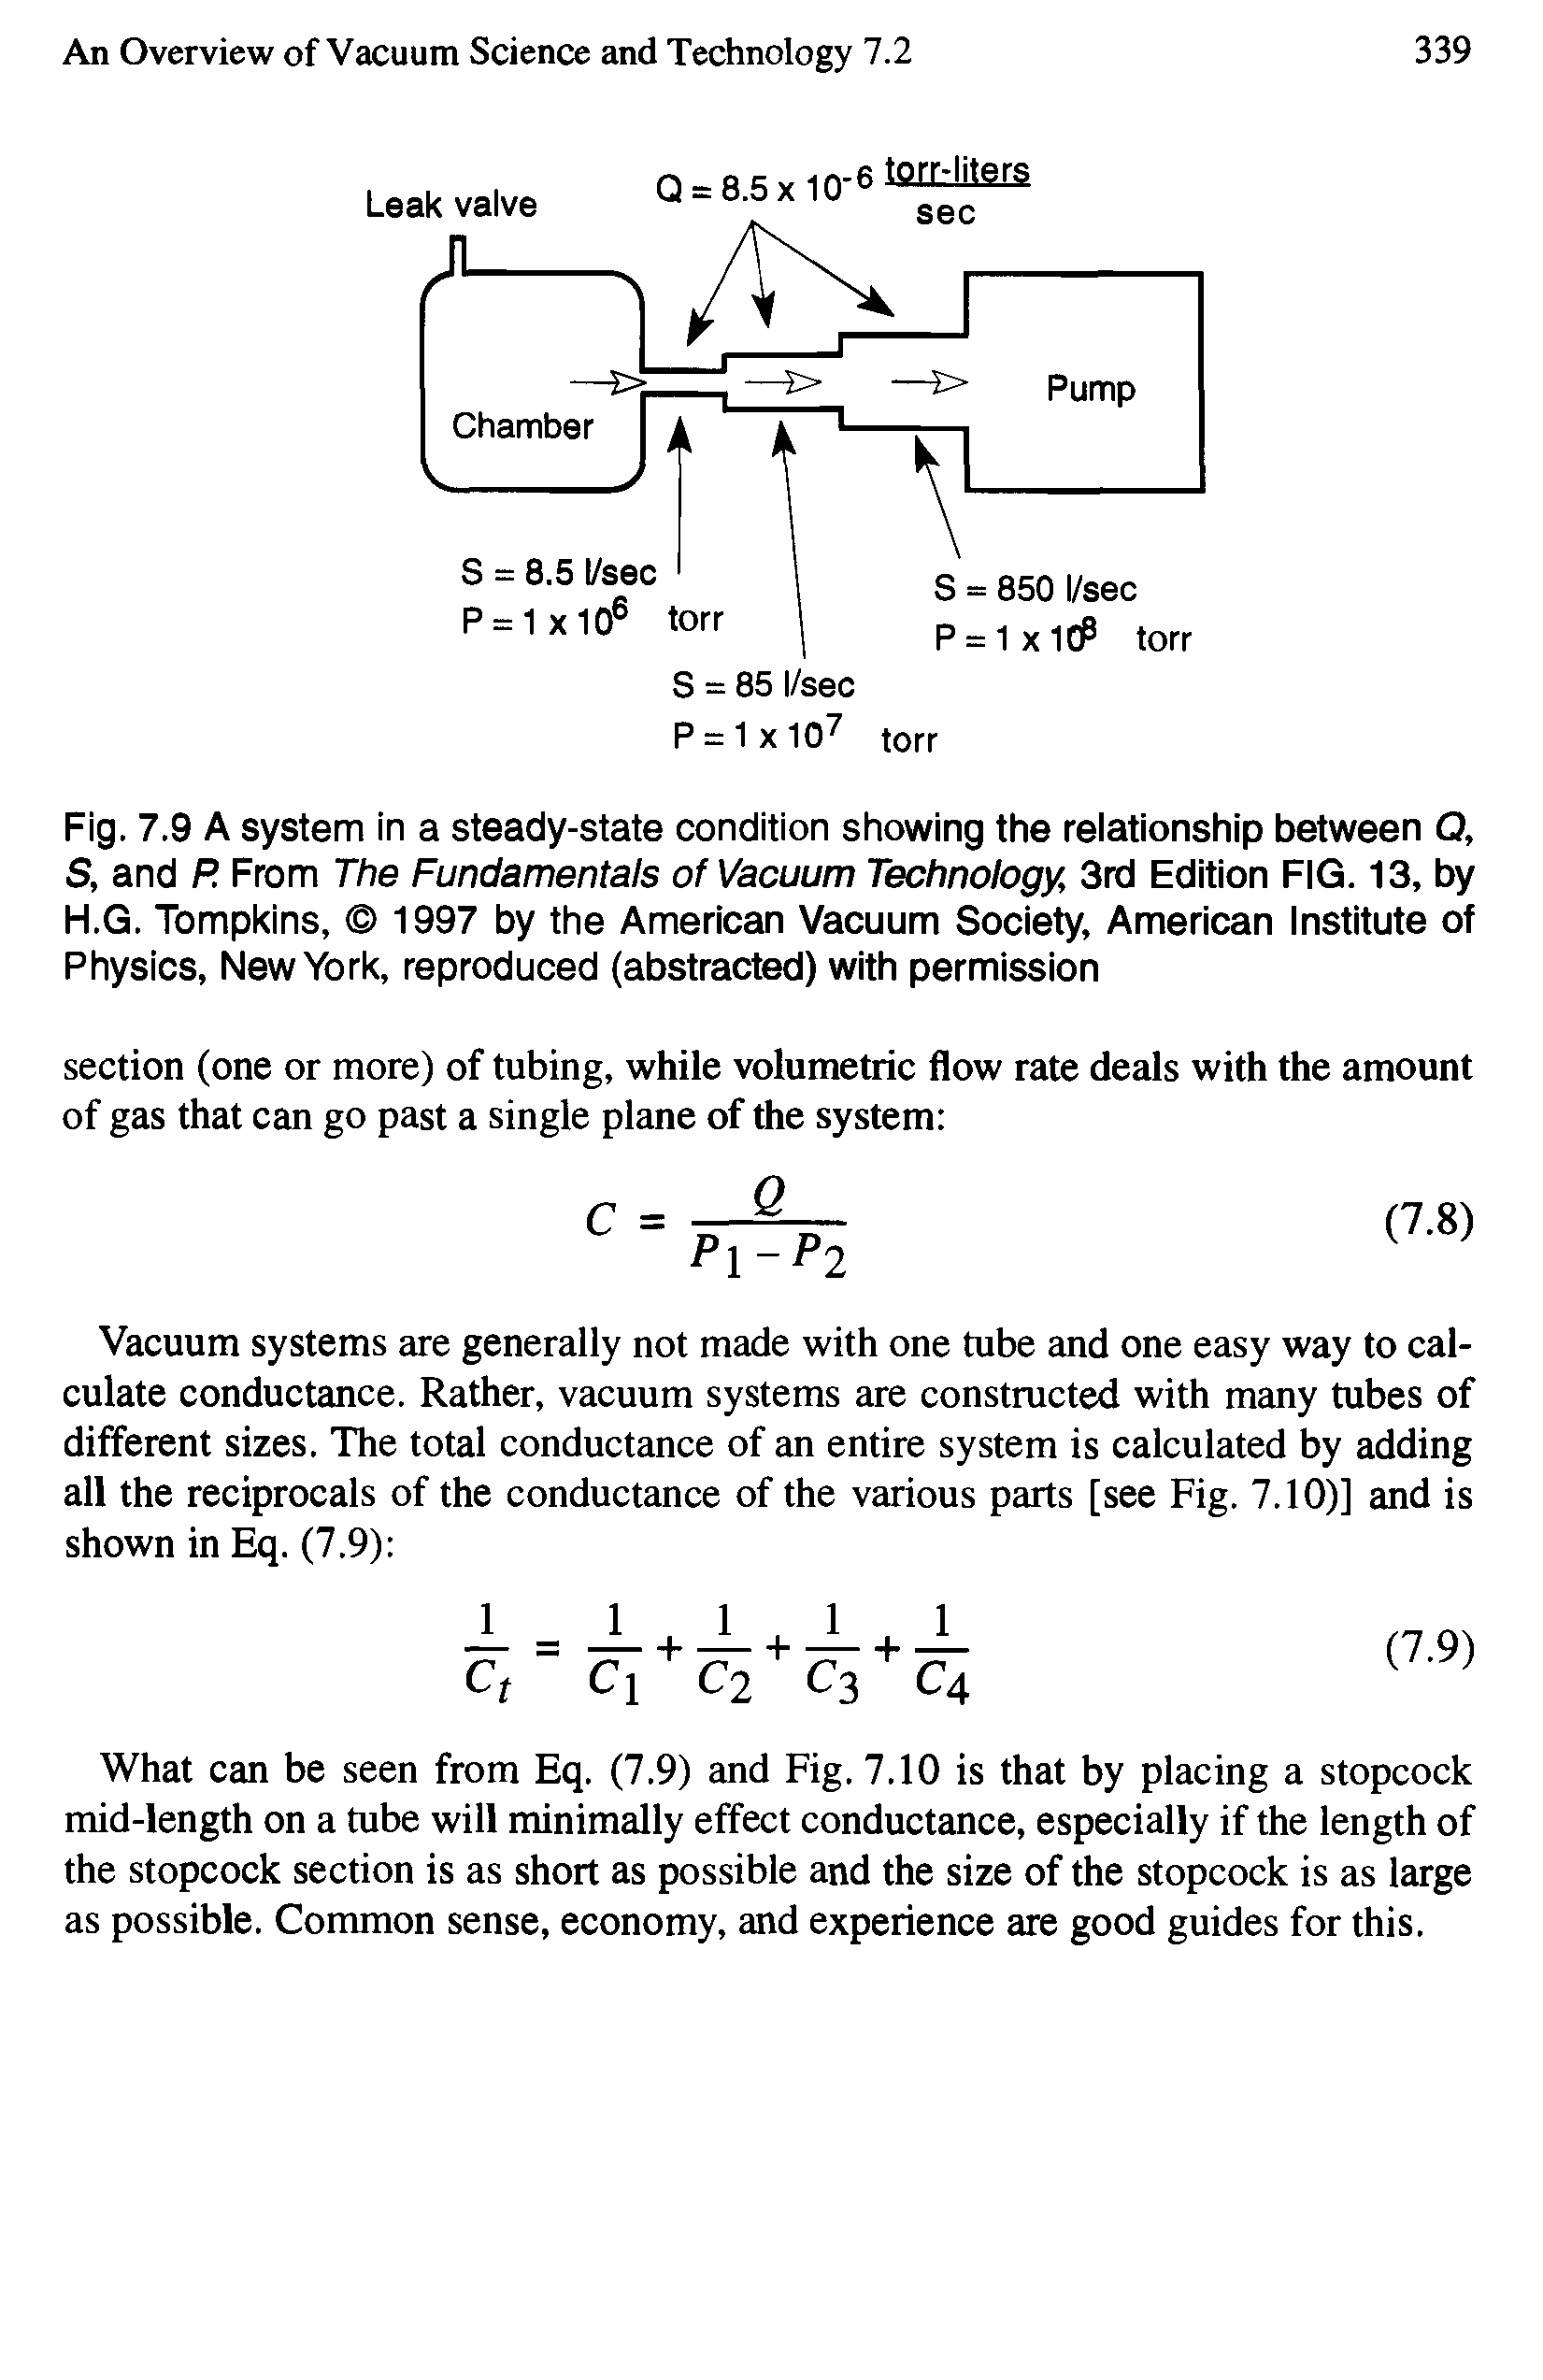 Fig. 7.9 A system in a steady-state condition showing the relationship between Q, S, and P. From The Fundamentals of Vacuum Technology, 3rd Edition FIG. 13, by H.G. Tompkins, 1997 by the American Vacuum Society, American Institute of Physics, New York, reproduced (abstracted) with permission...